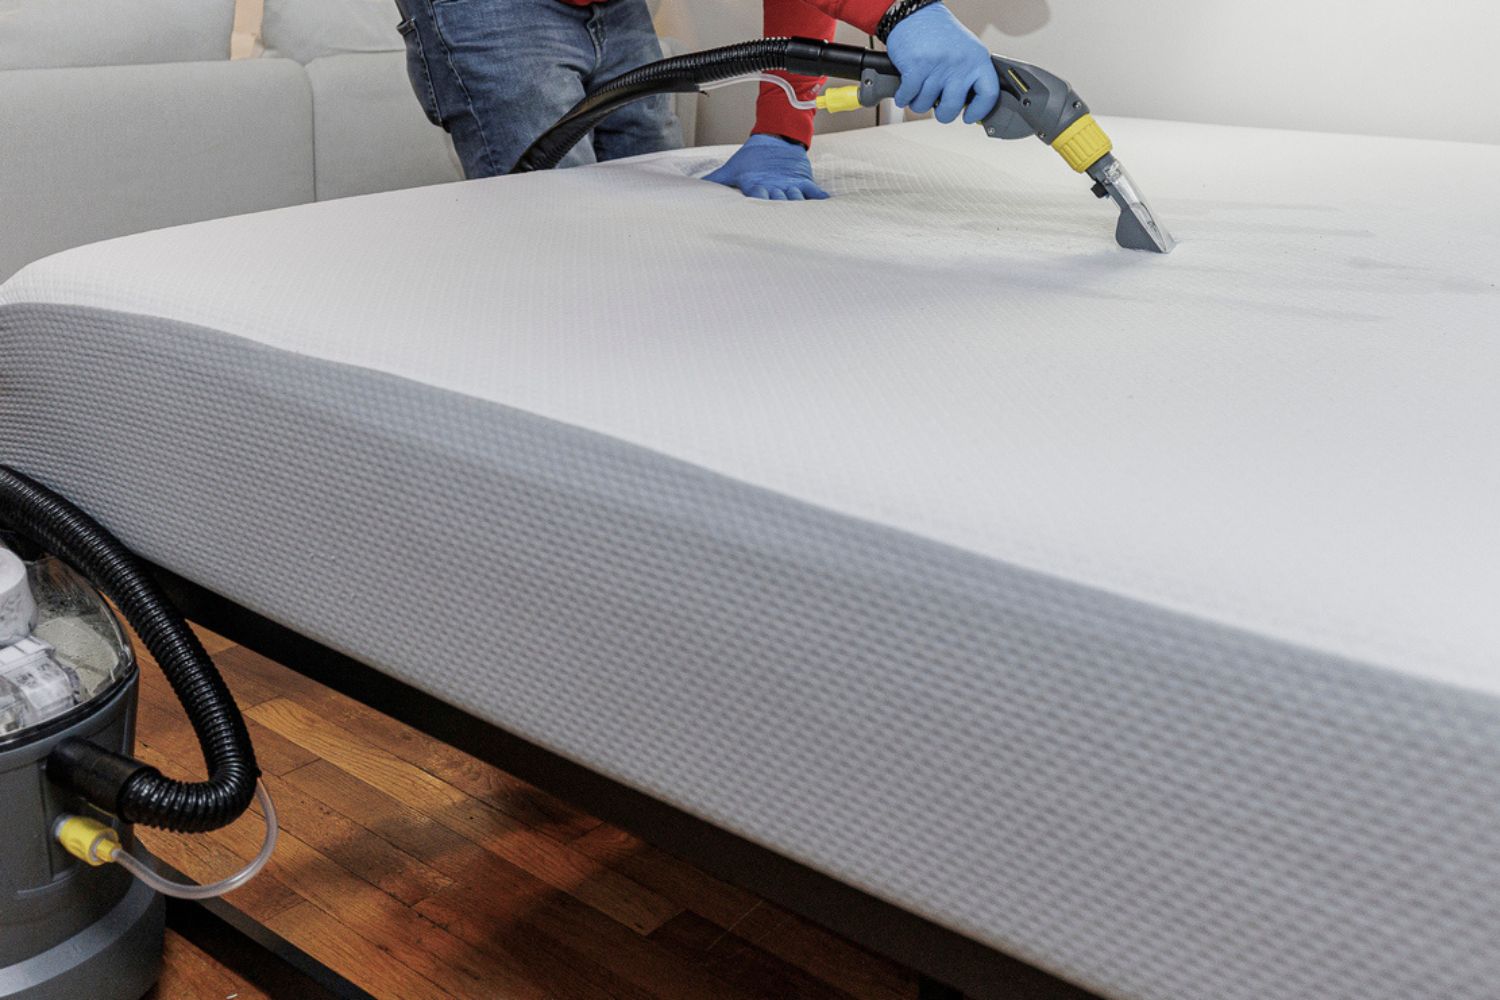 A person steaming a mattress with the best steamer for bed bugs option